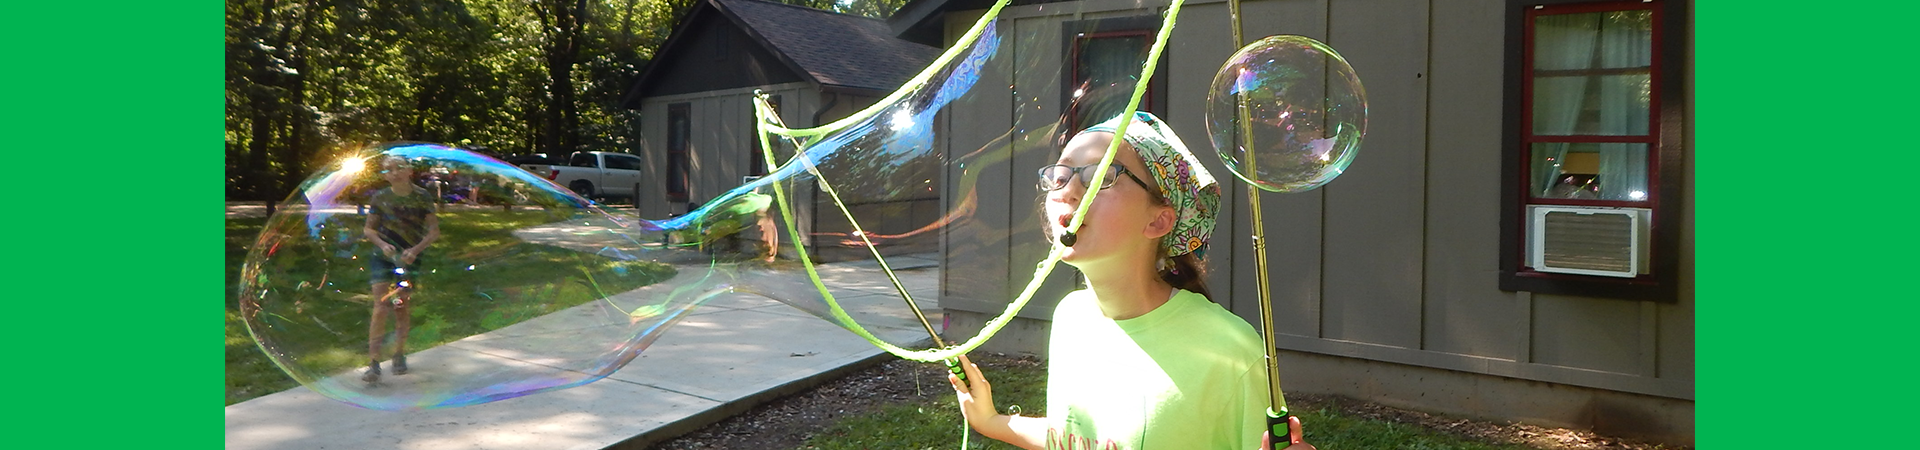  girl scout blowing bubbles at camp torqua 